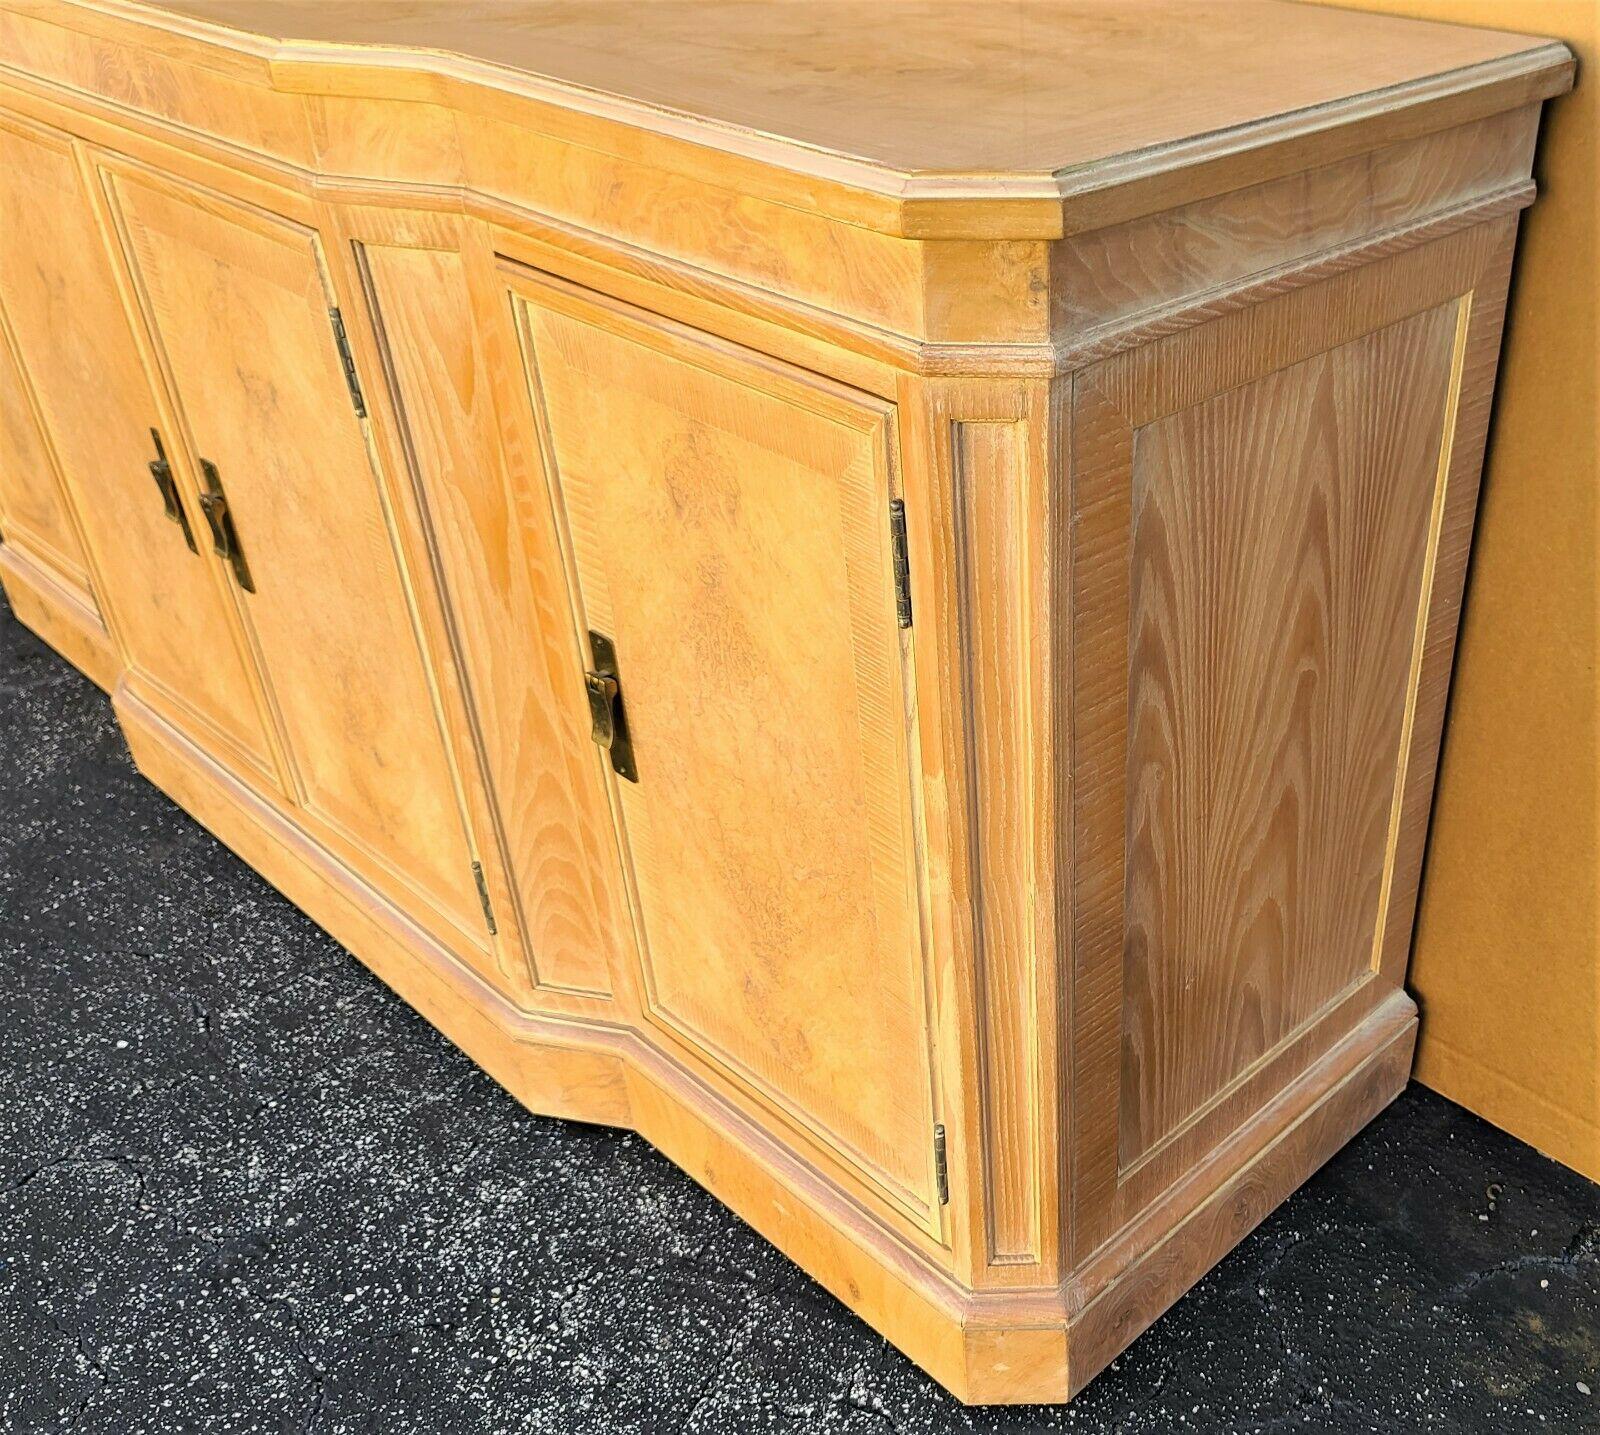 Regency Burl Sideboard Buffet Cabinet by Heritage from Their Corinthian Collection